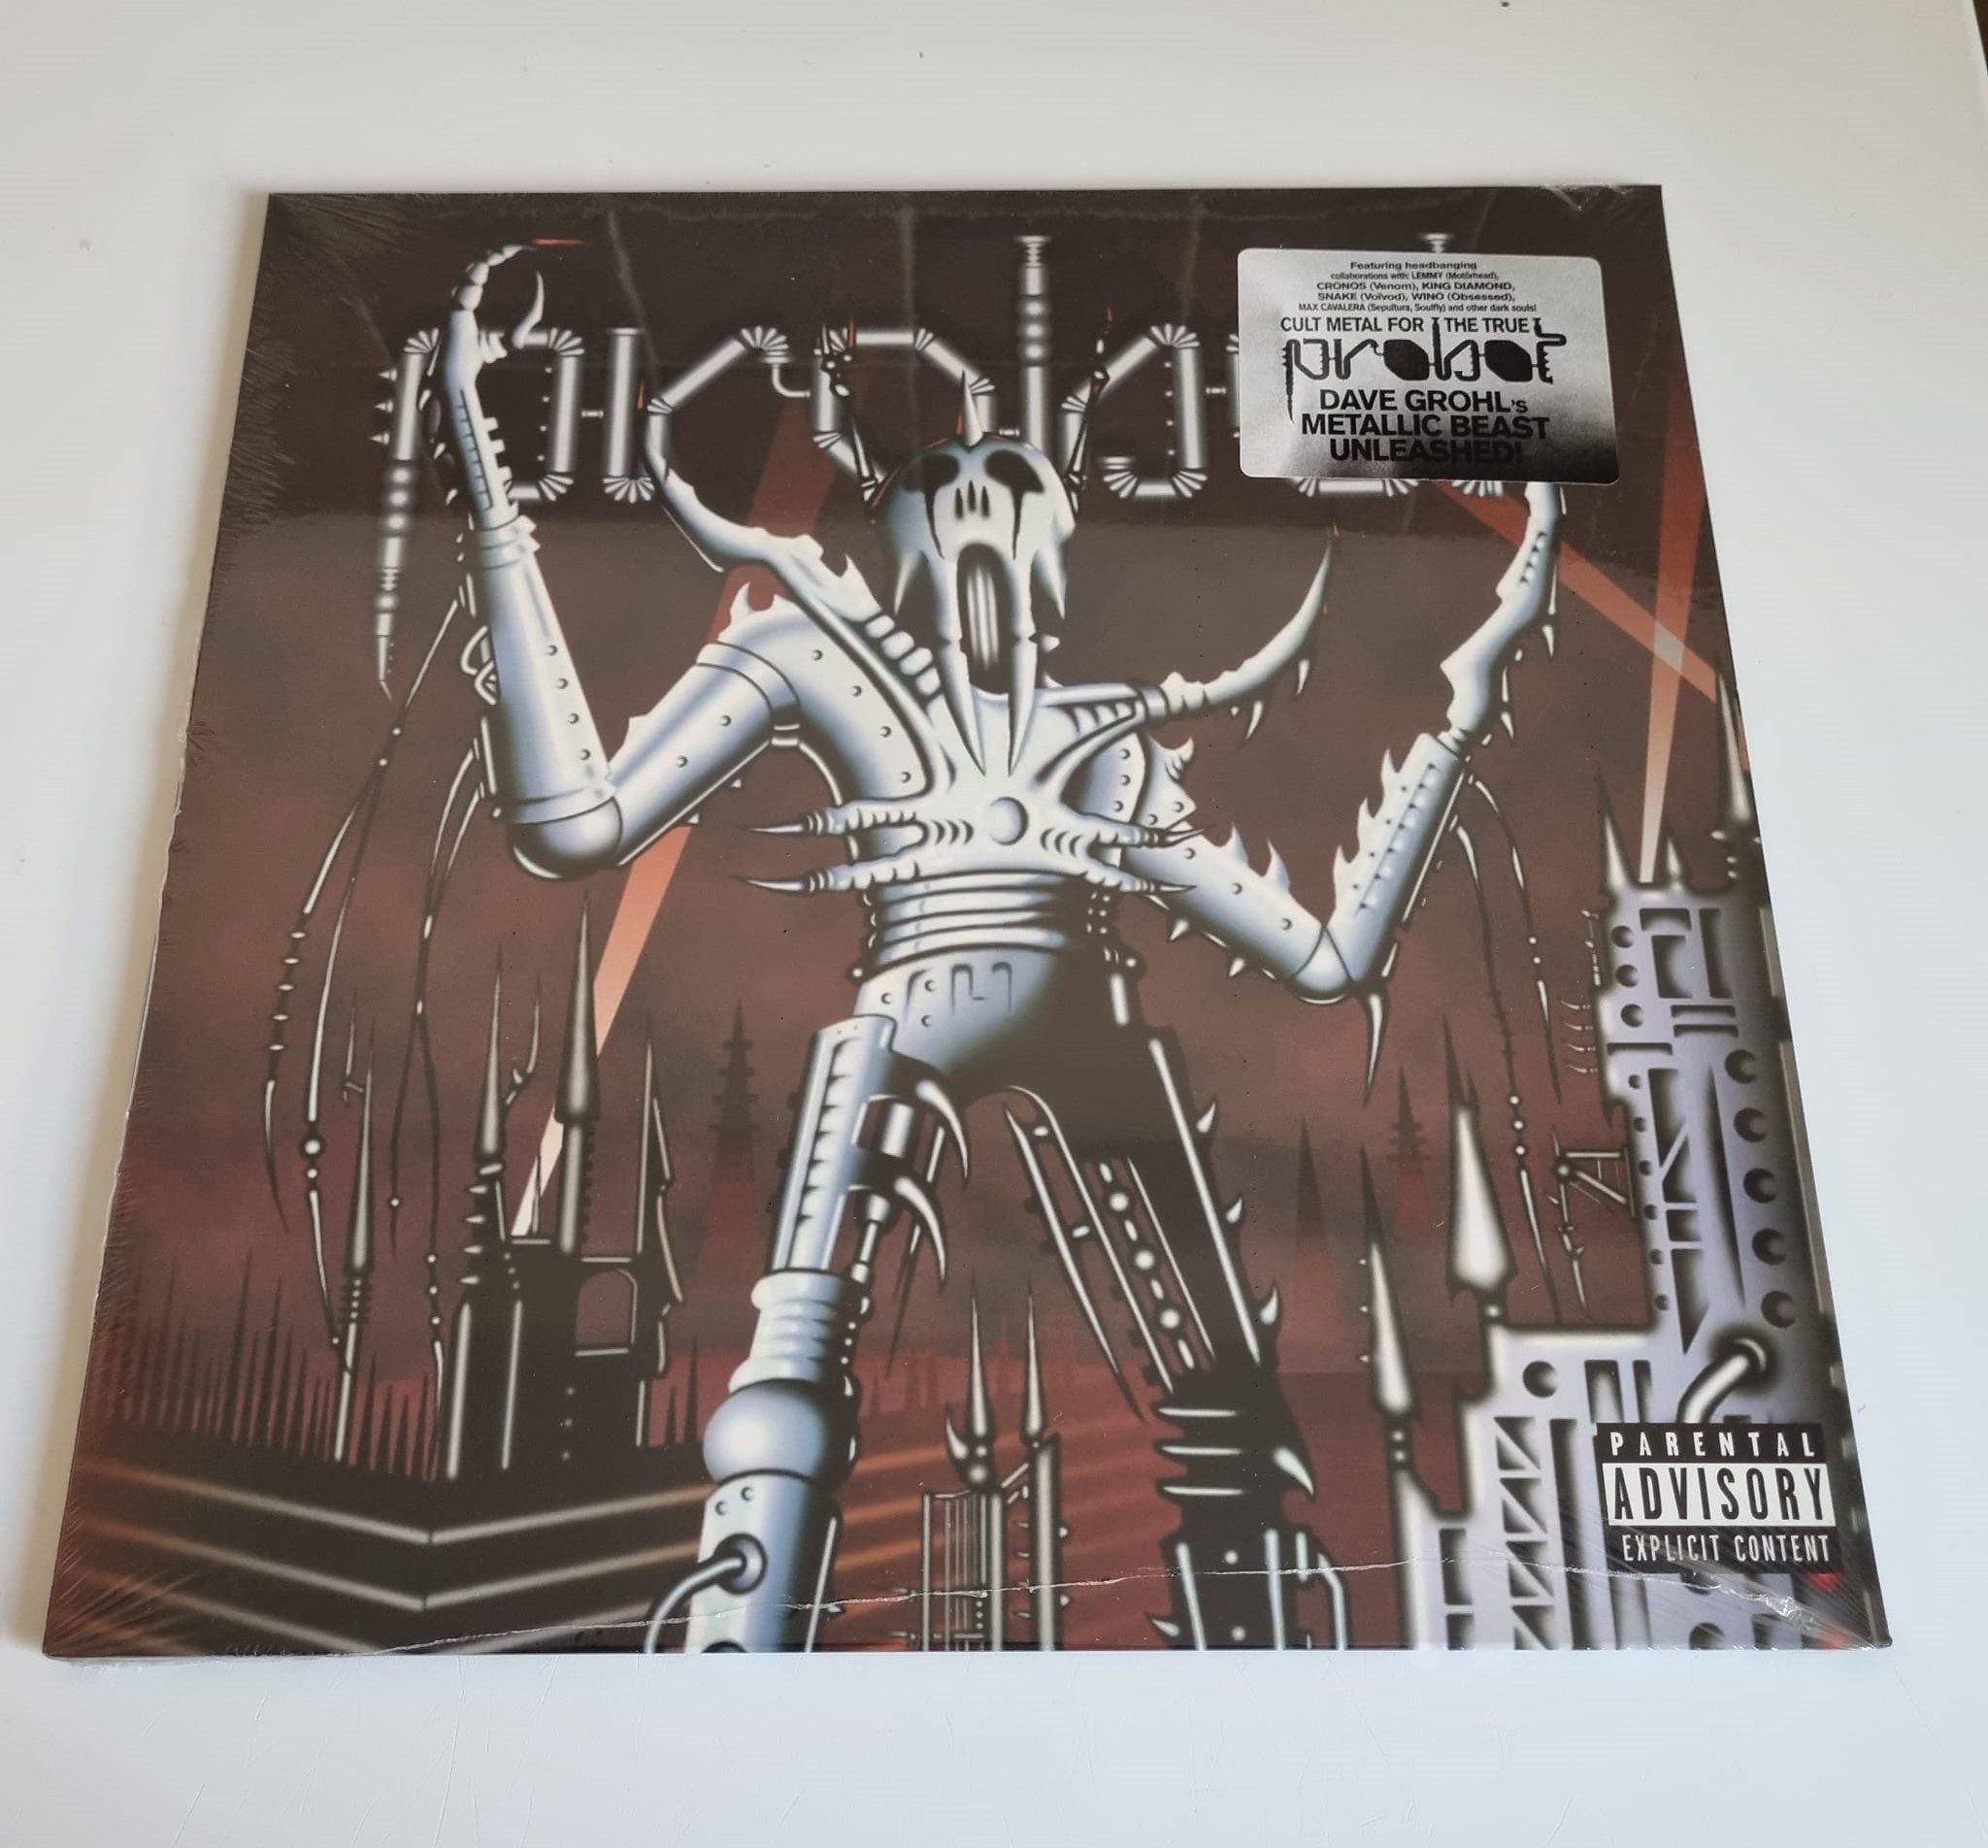 Buy this rare Probot record by clicking here